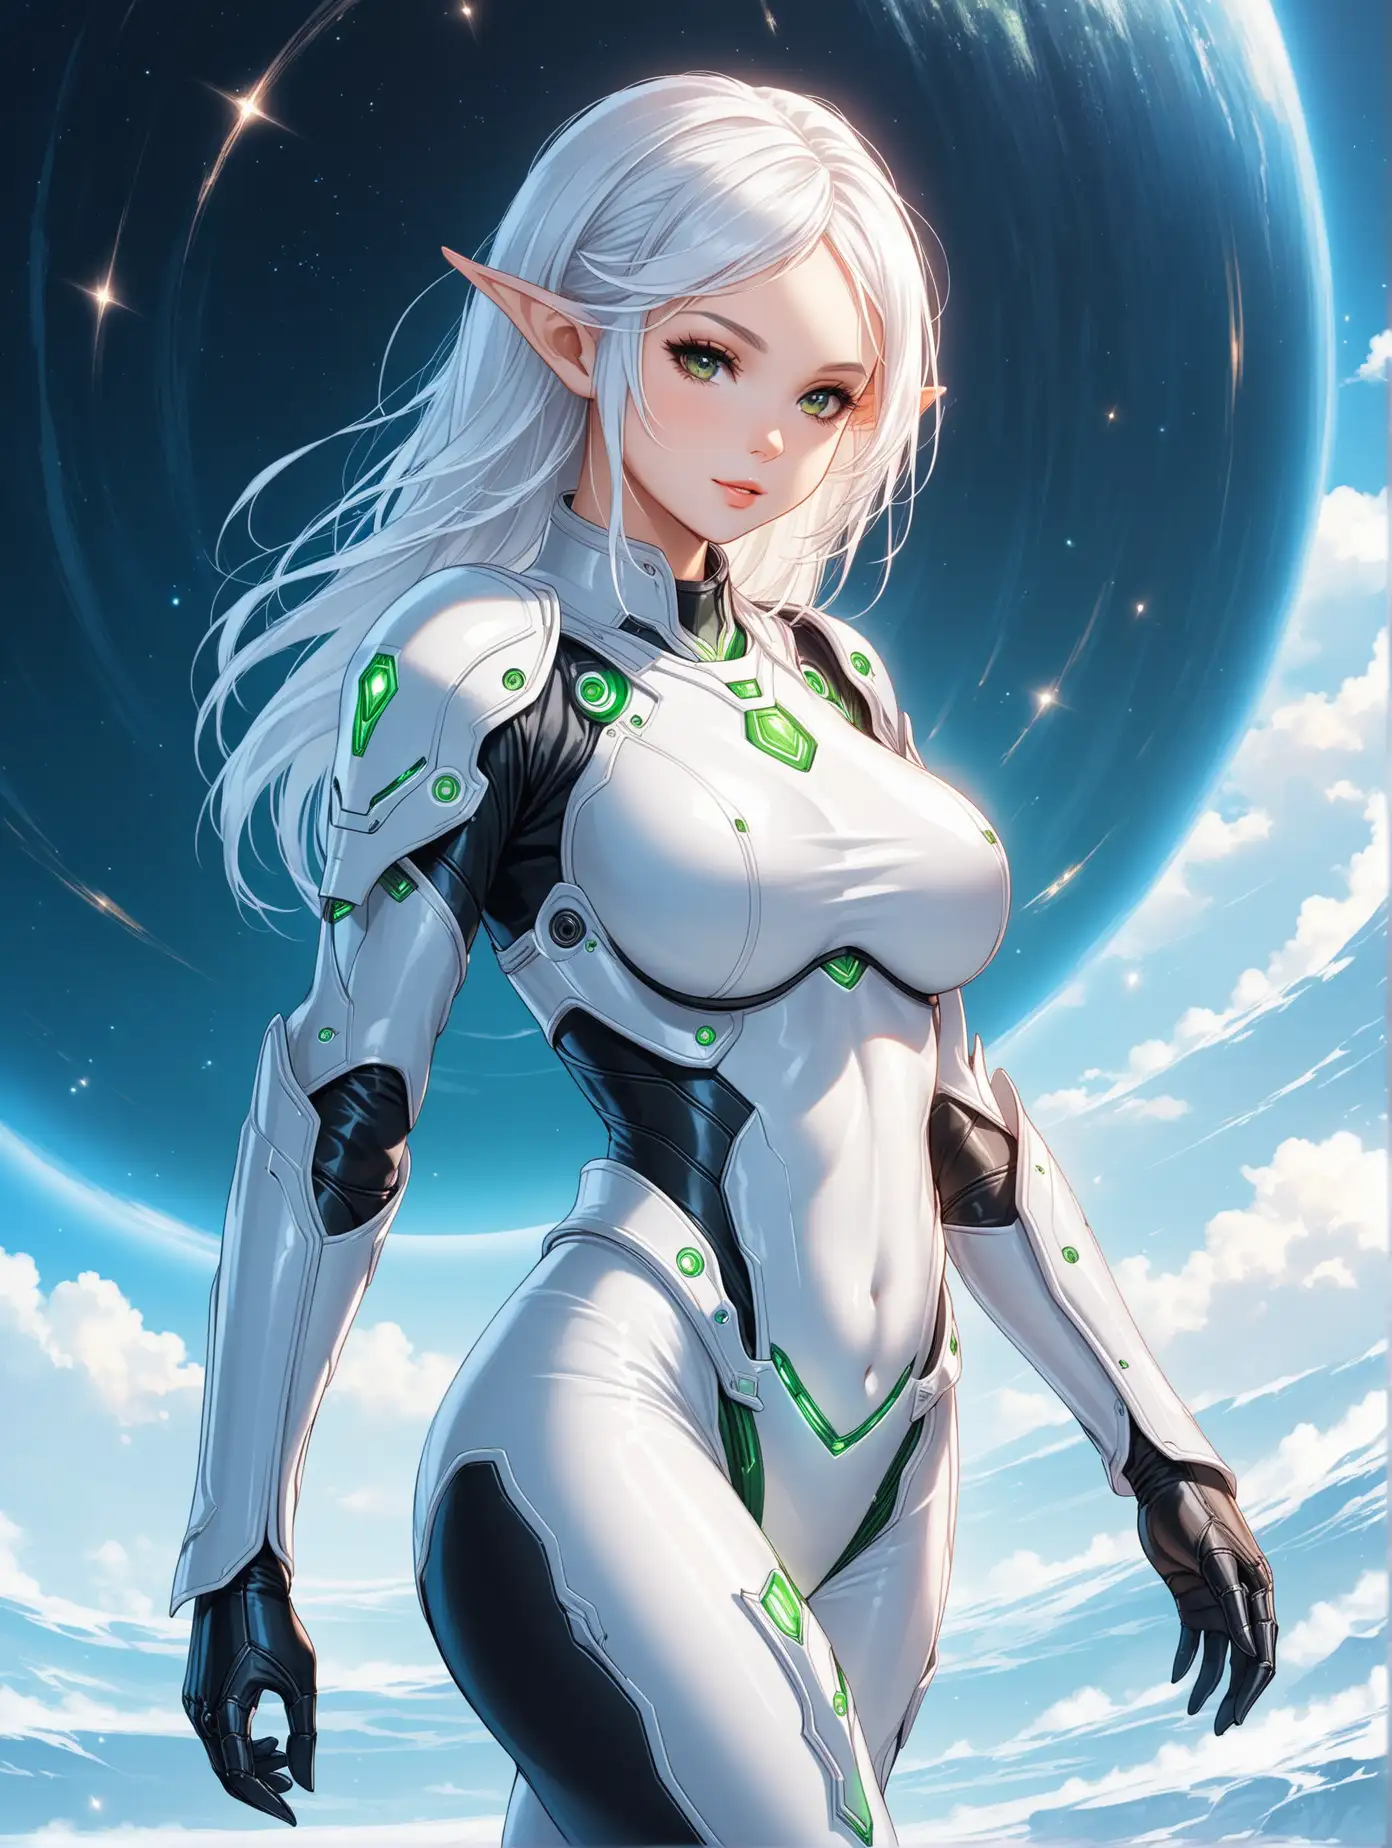 SciFi-Elf-with-White-Hair-in-Latex-Armor